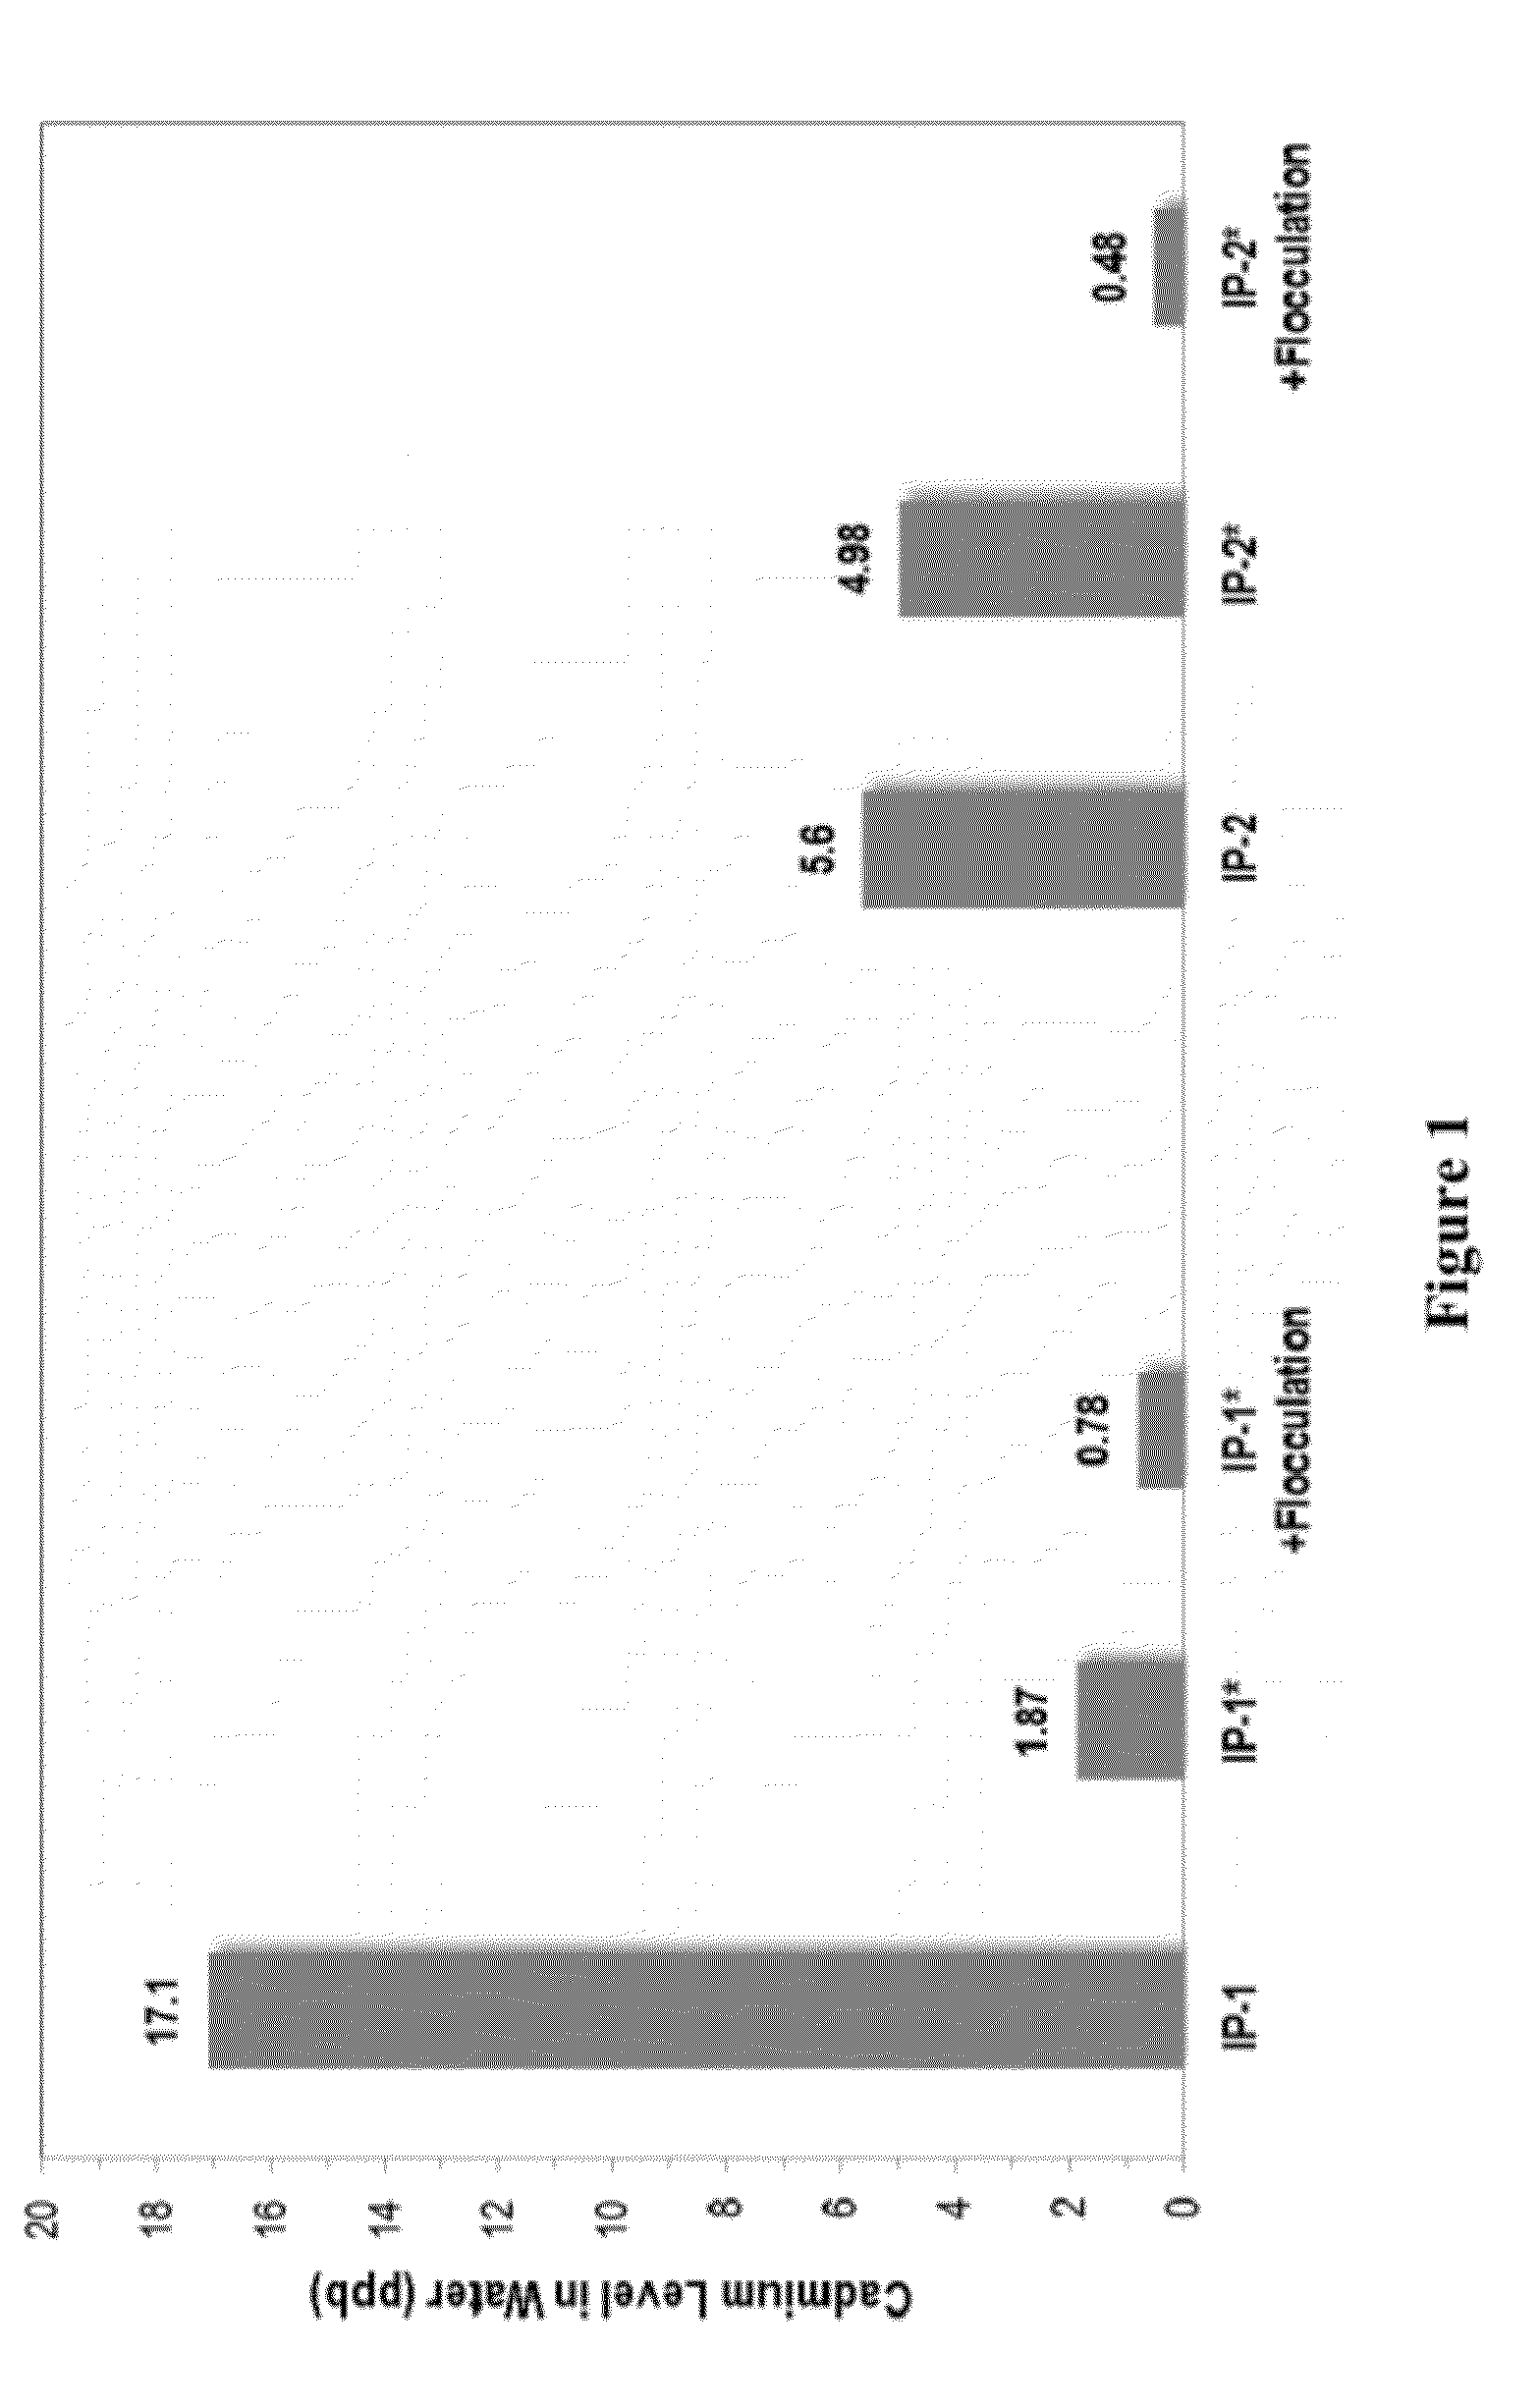 Methods for removing contaminants from aqueous systems